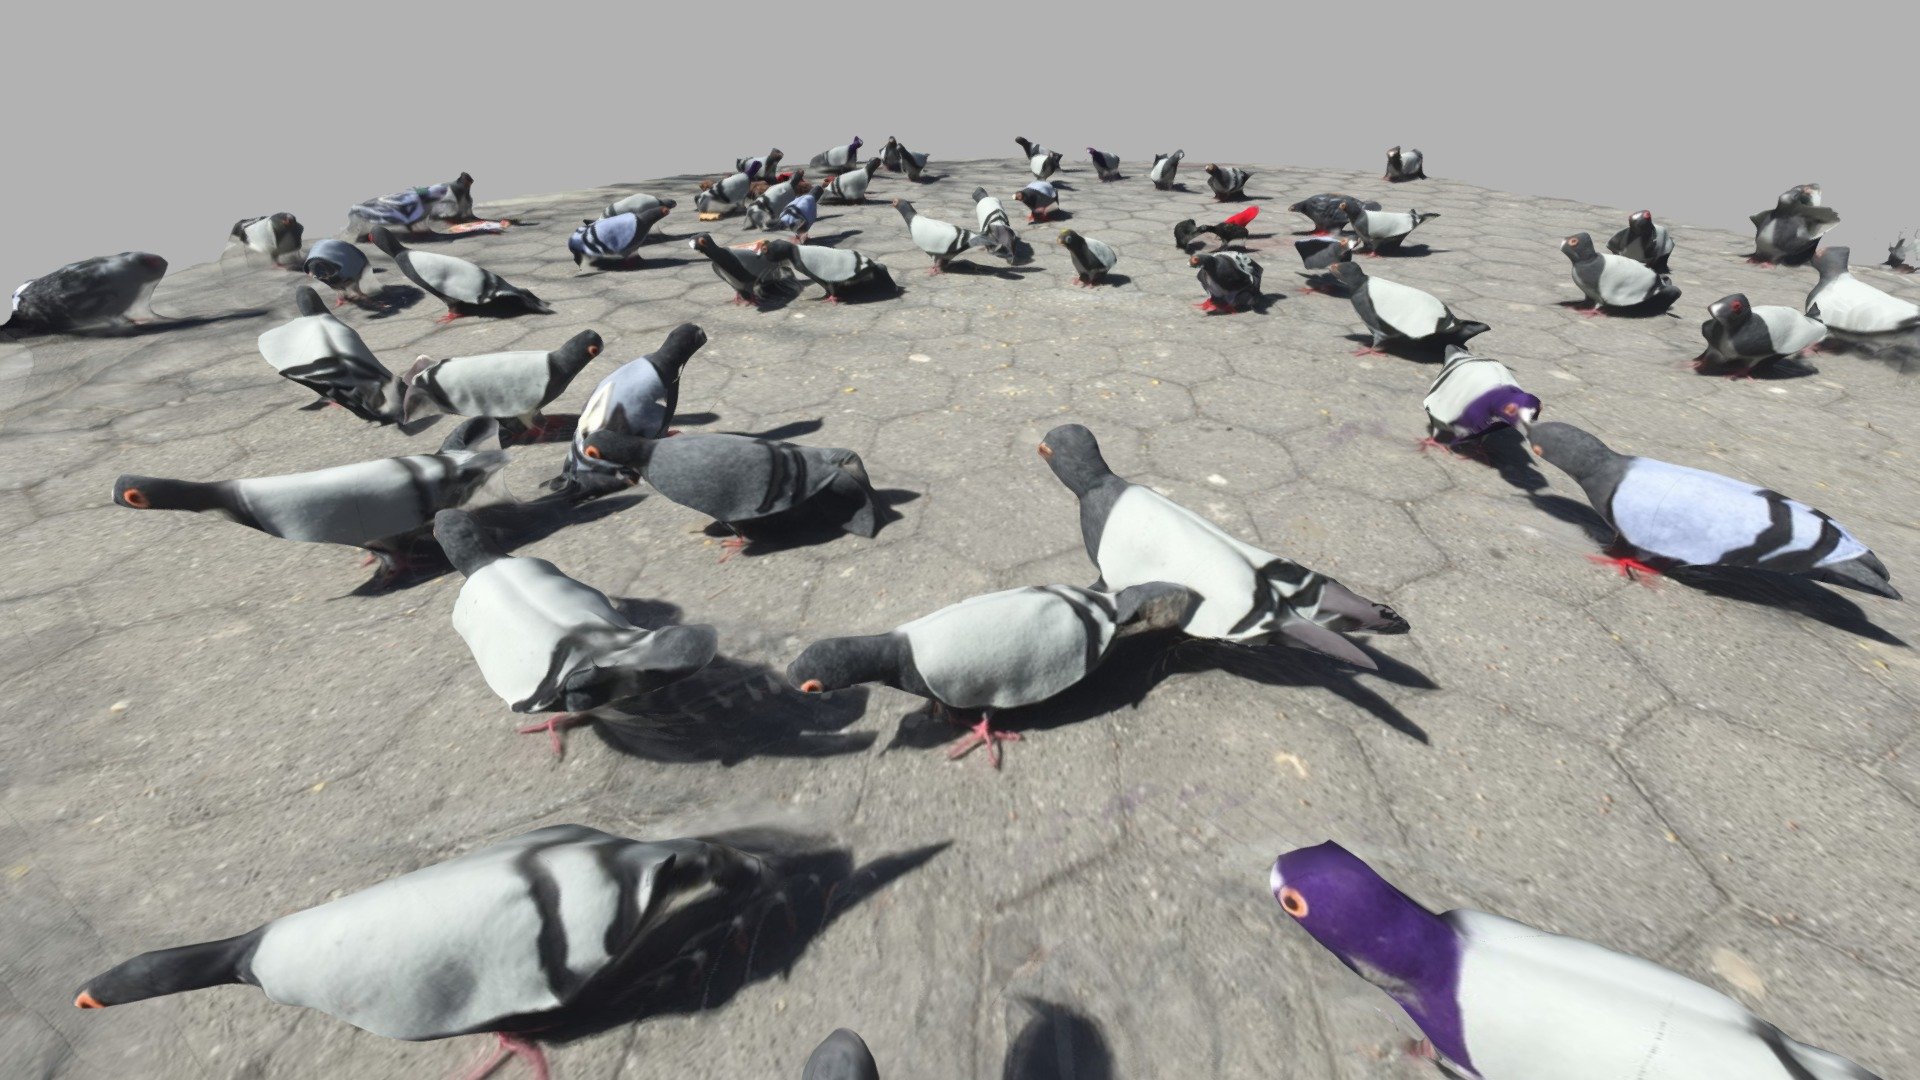 Wow! I managed to take 50 pictures of these birds. I'm pretty proud of the result&hellip;
Processed with Recap360 and cropped with Blender 3d model